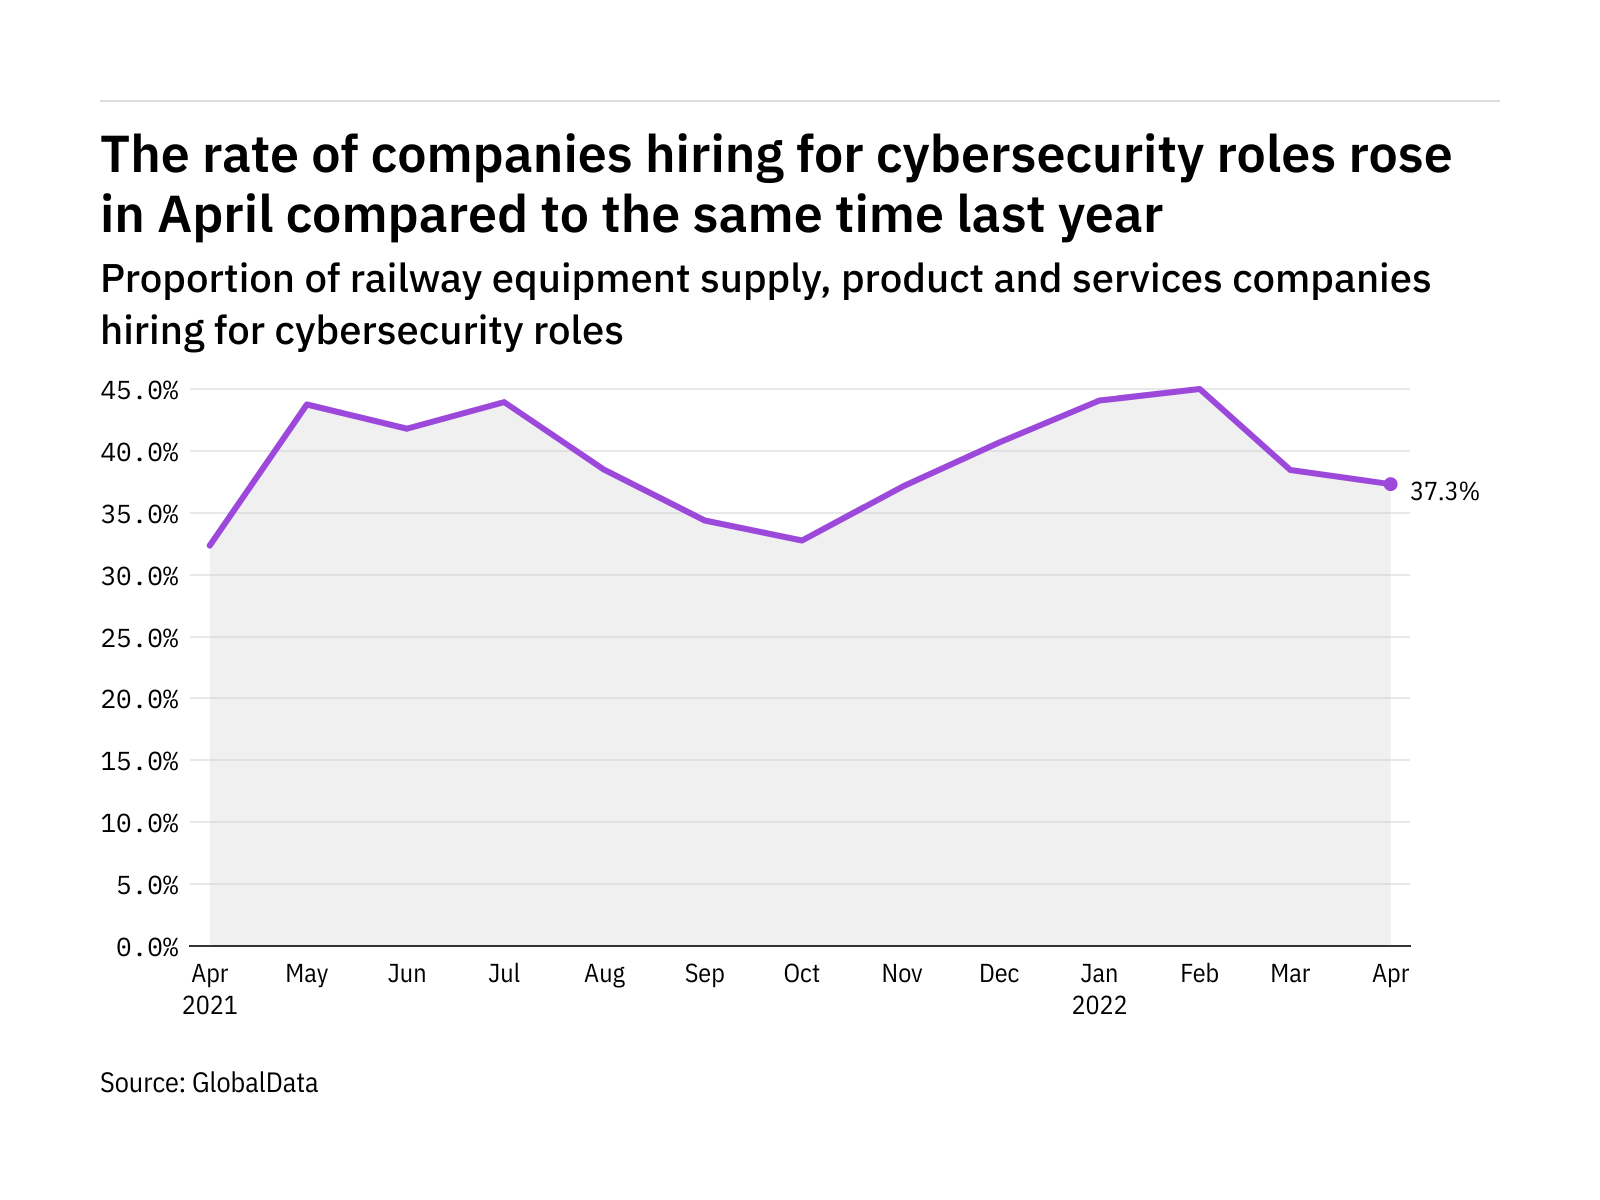 Cybersecurity hiring levels in the railway industry rose in April 2022